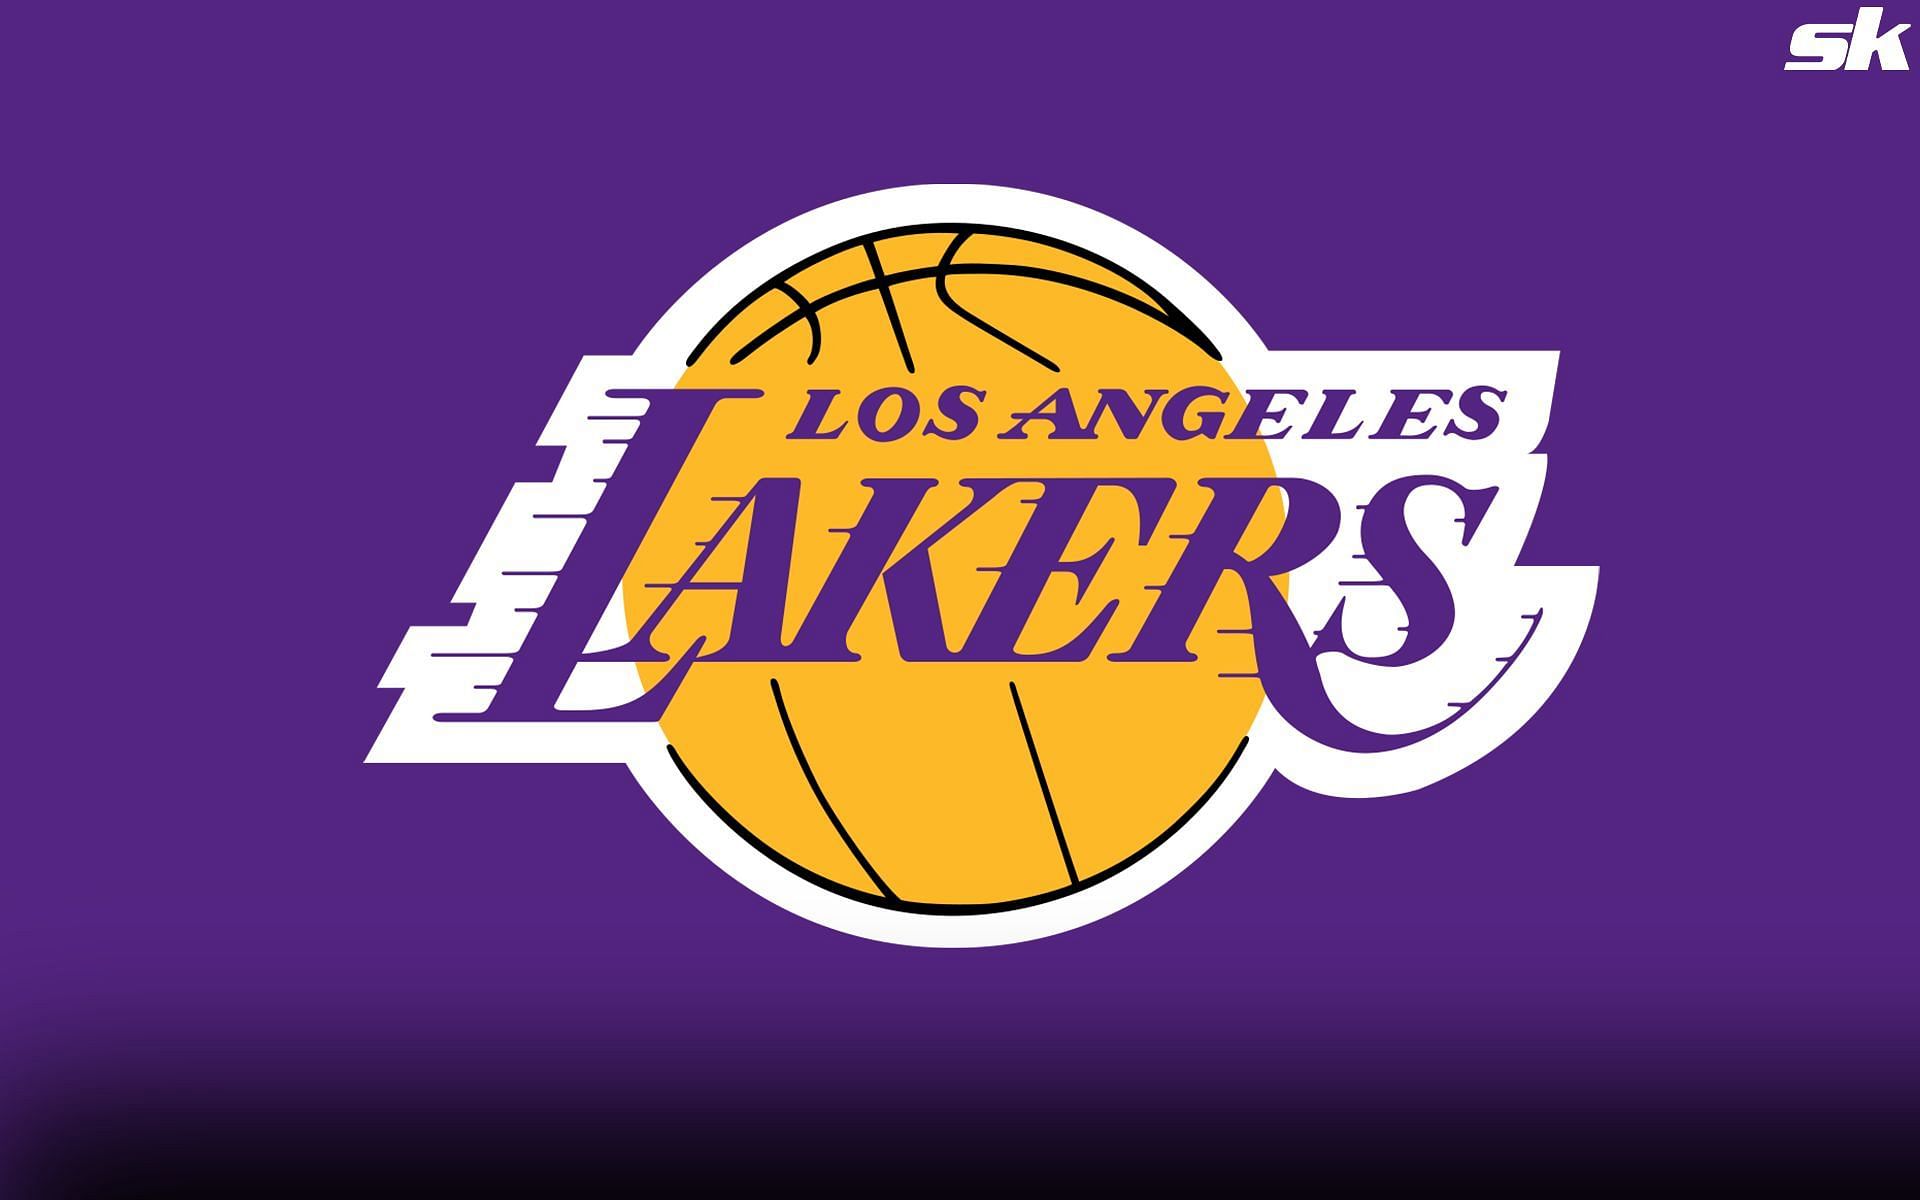 Are the Lakers getting ready for a major overhaul this summer?